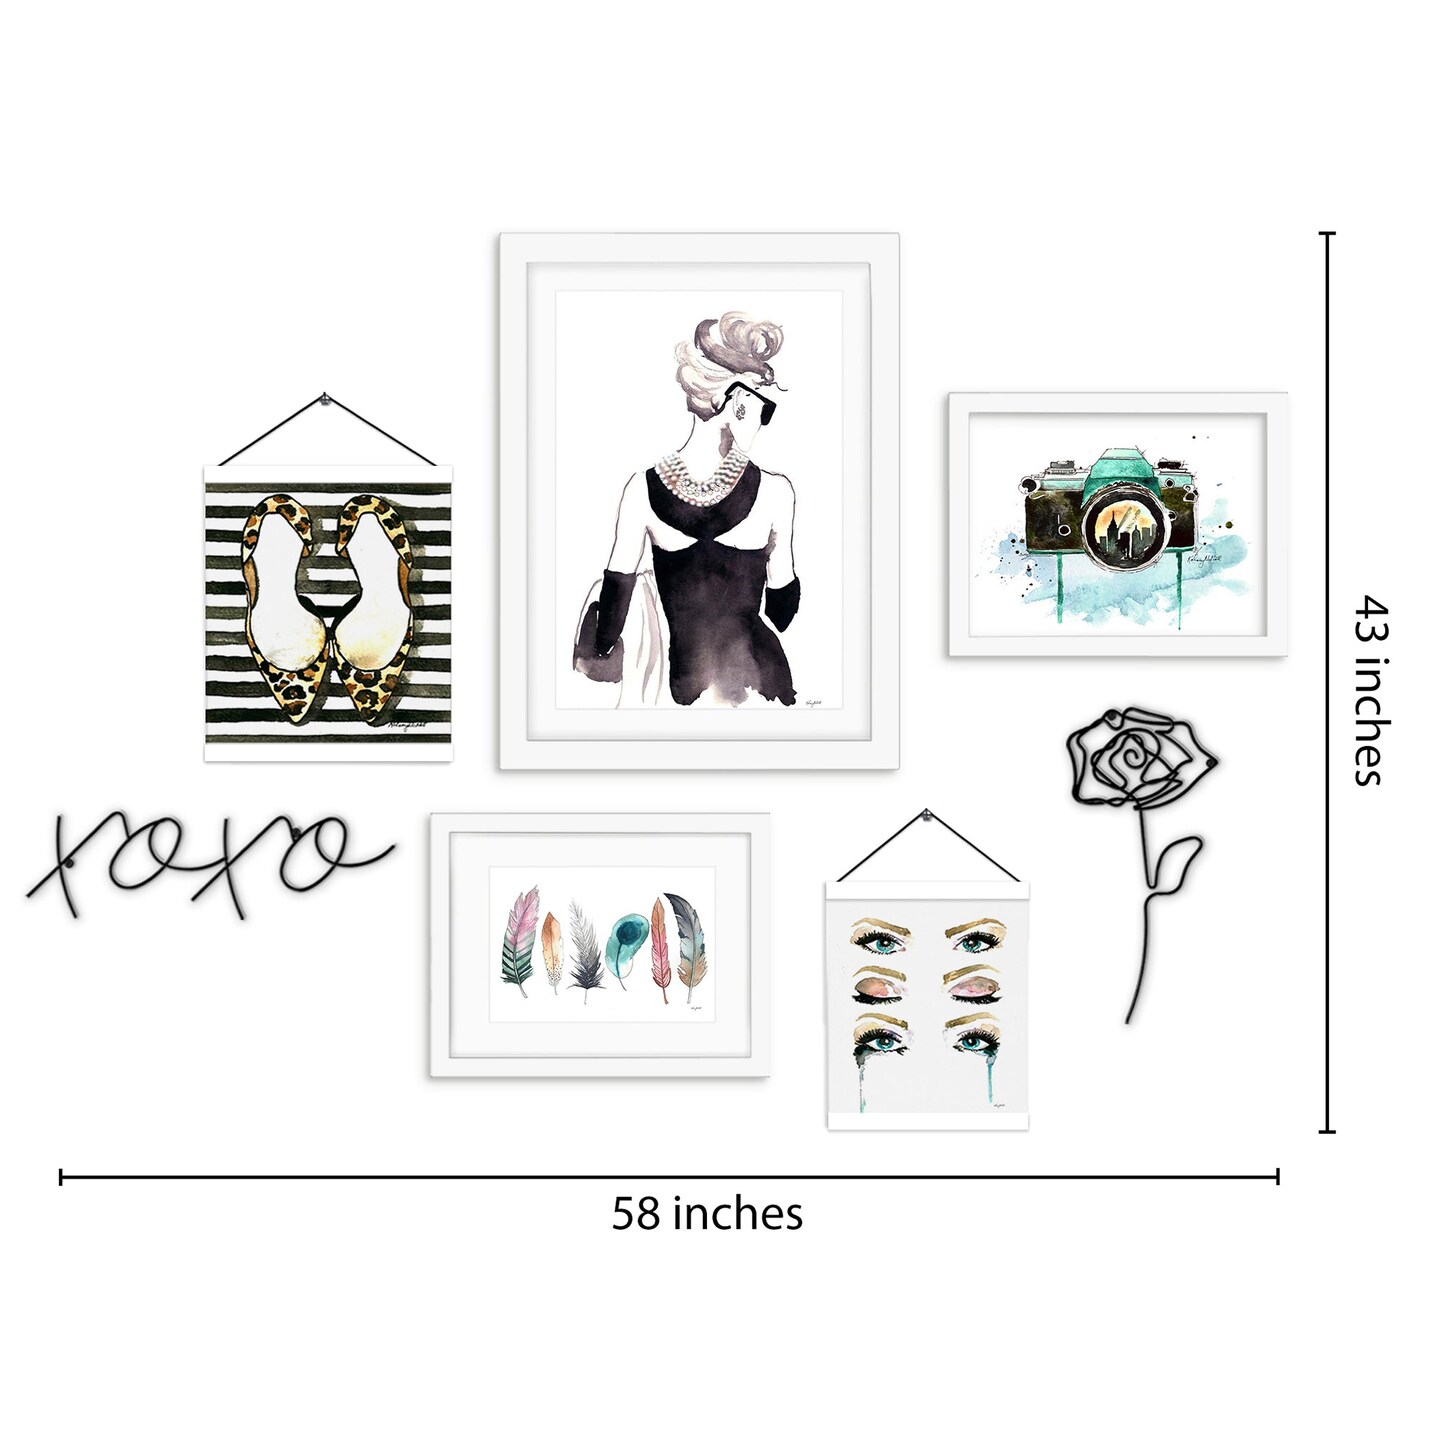 Framed Multimedia Gallery Wall Art Set - Optics of Fashion and Feathers